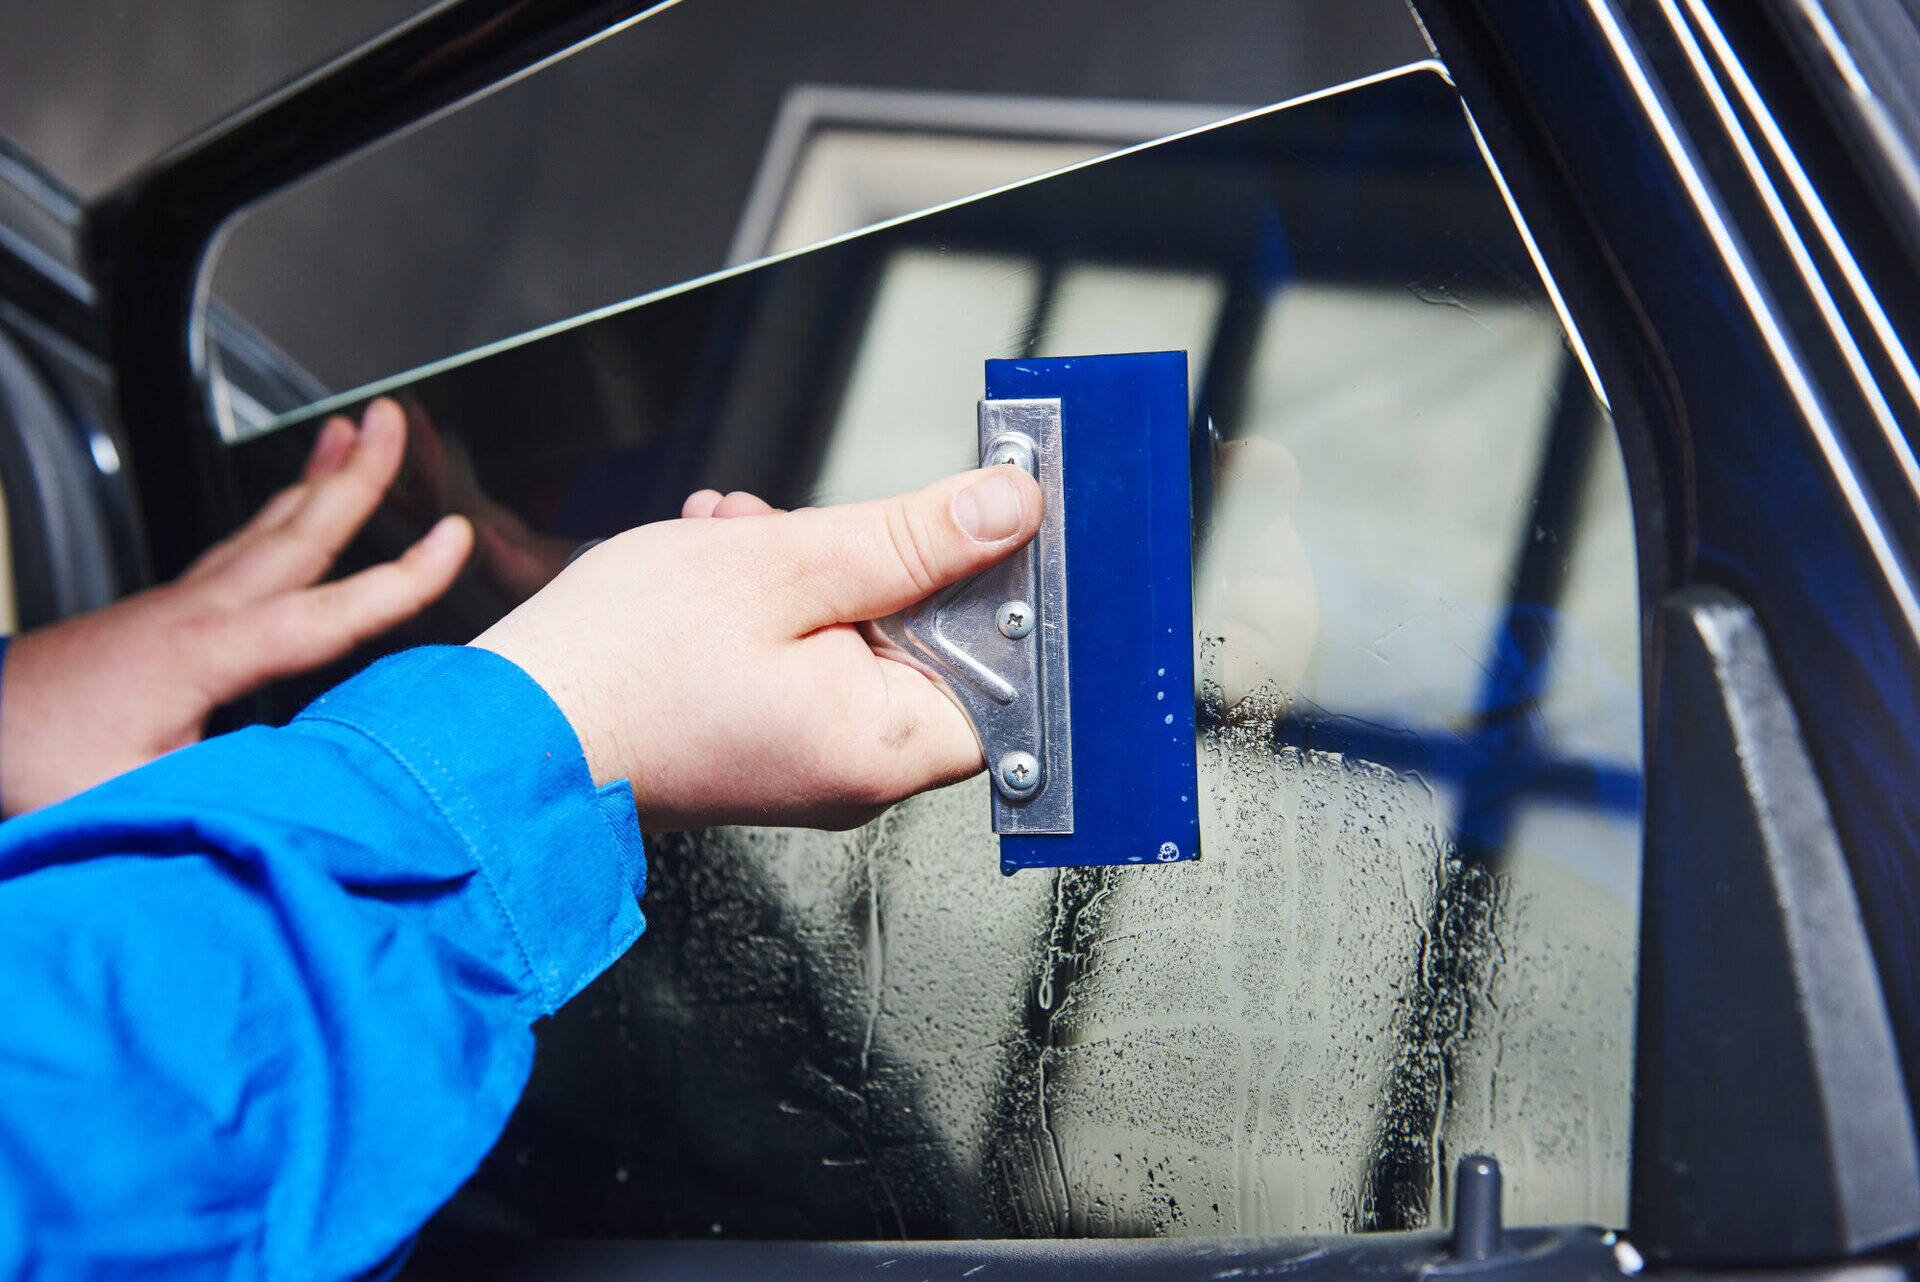 How To Fix Tint On Car Windows